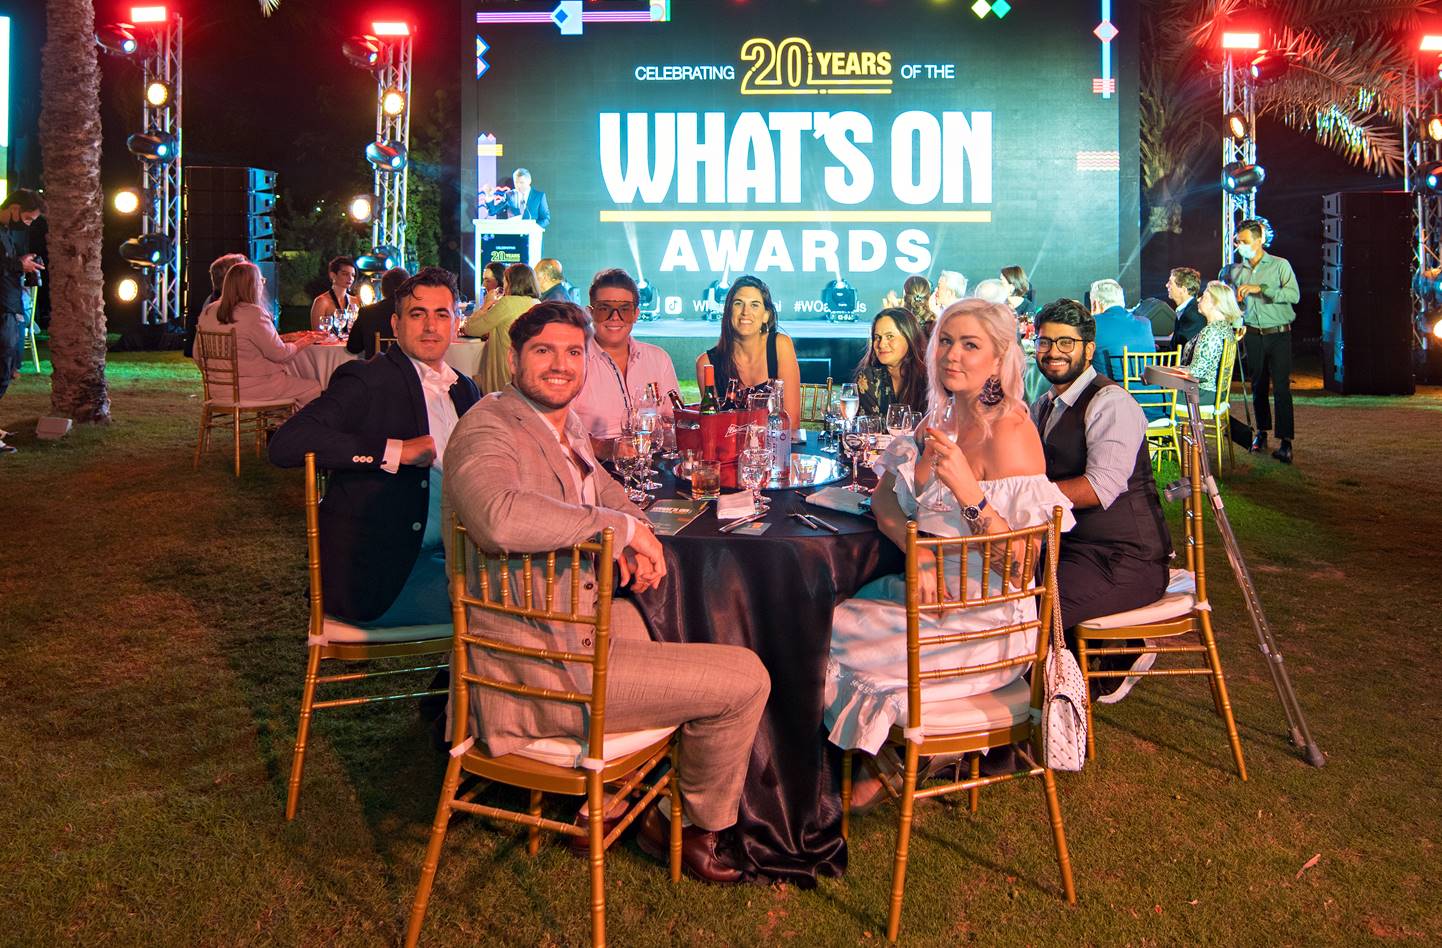 WhatsON Awards:  An evening with Italian taste